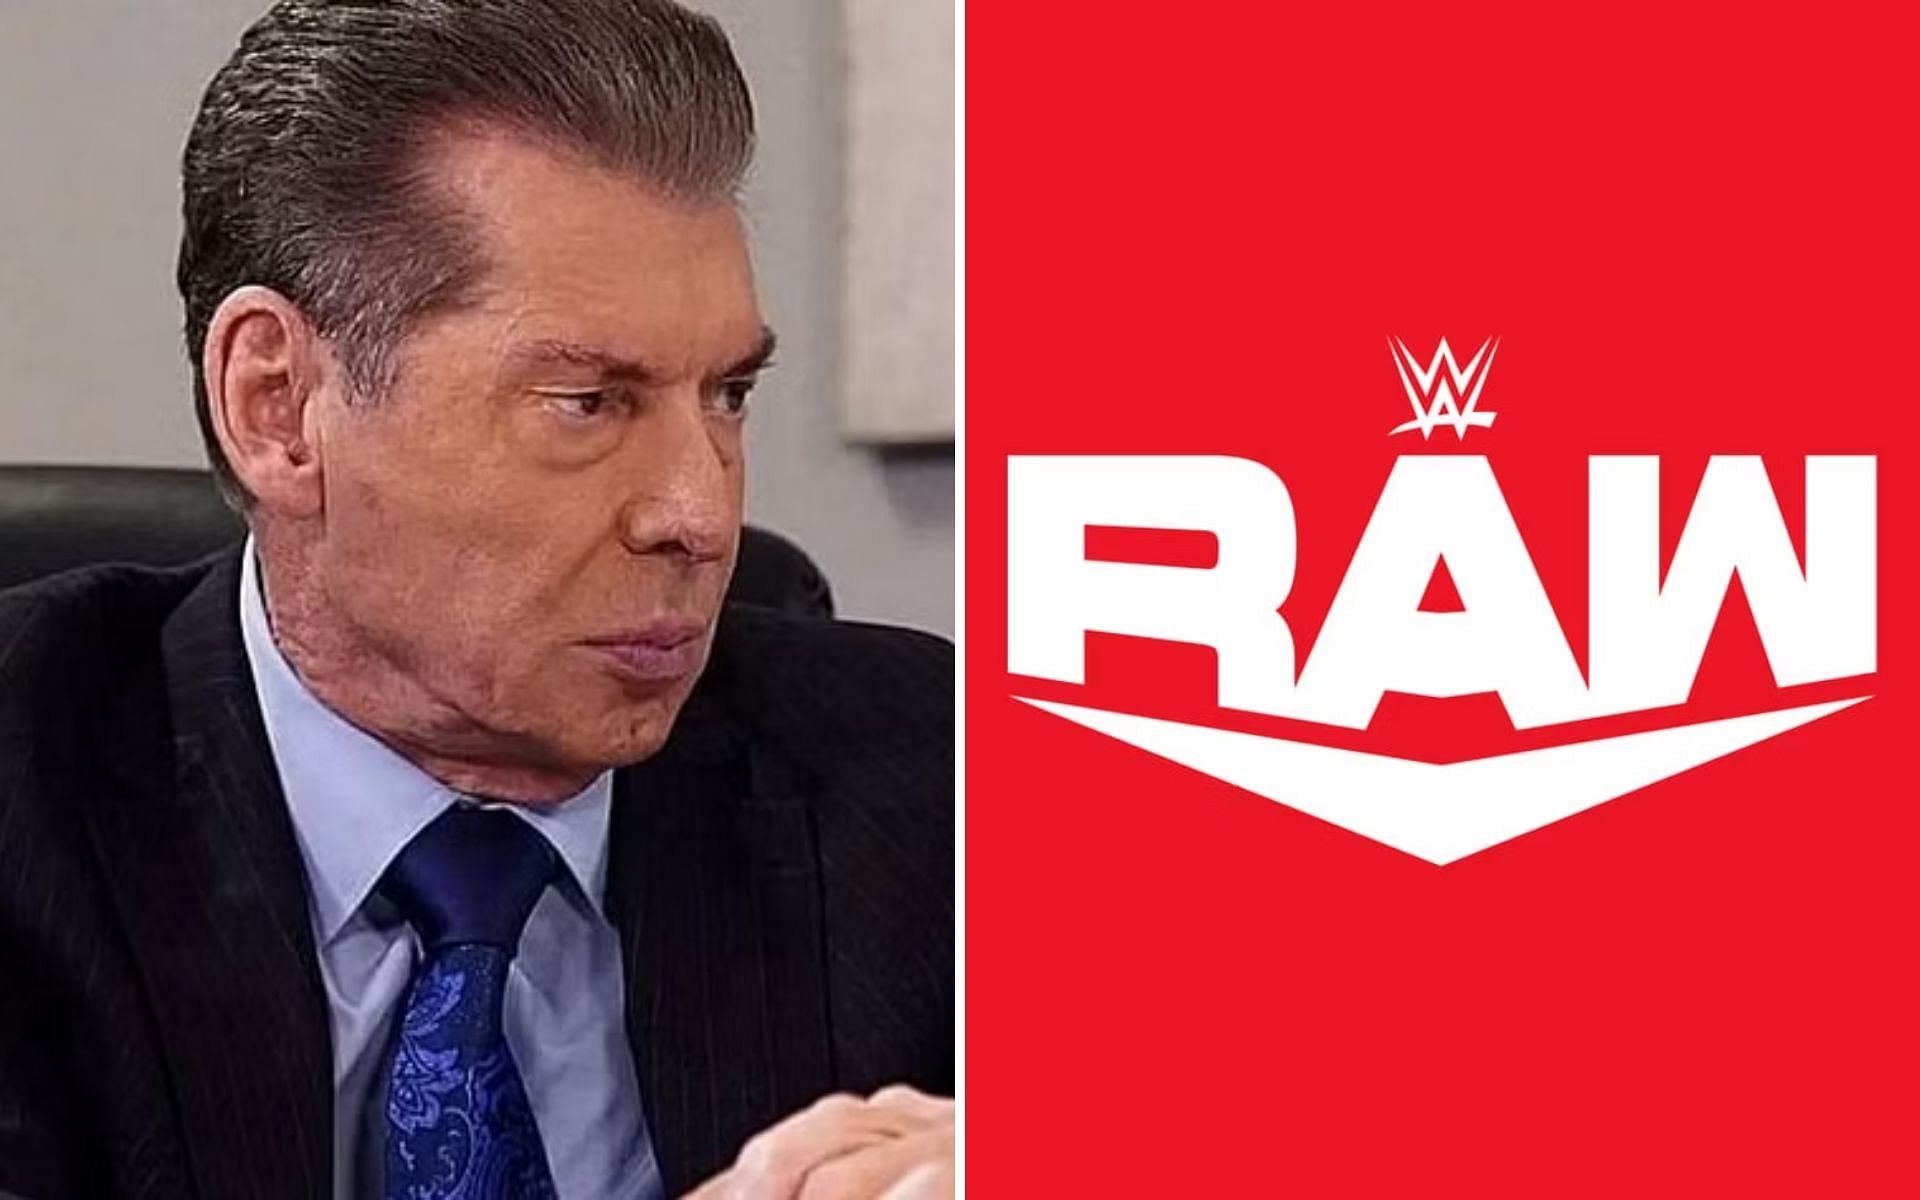 The ex-WWE writer said McMahon now has &quot;bigger fish to fry&quot;